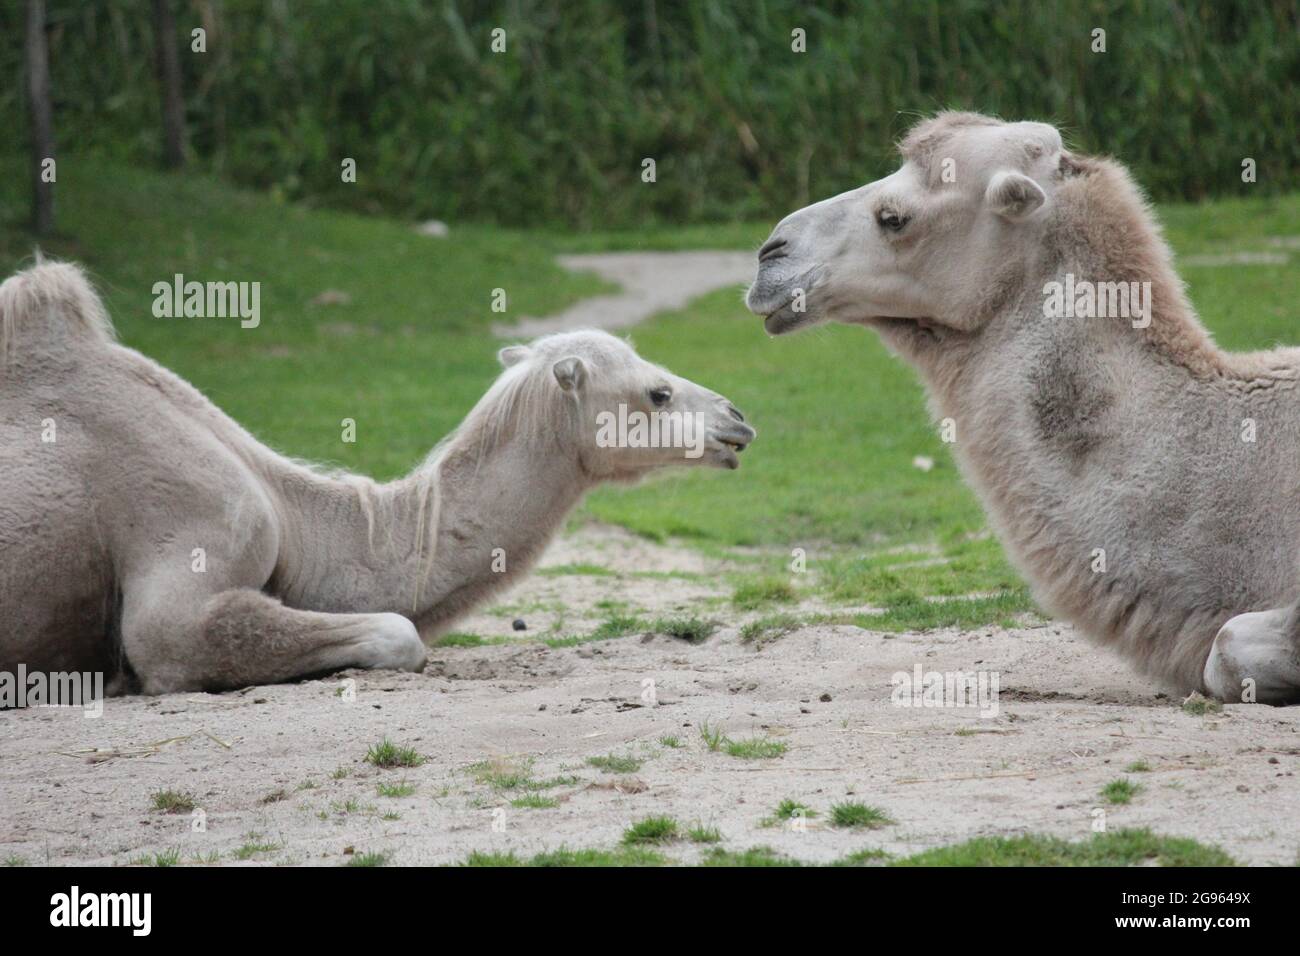 Camel in Overloon zoo, the Netherlands Stock Photo